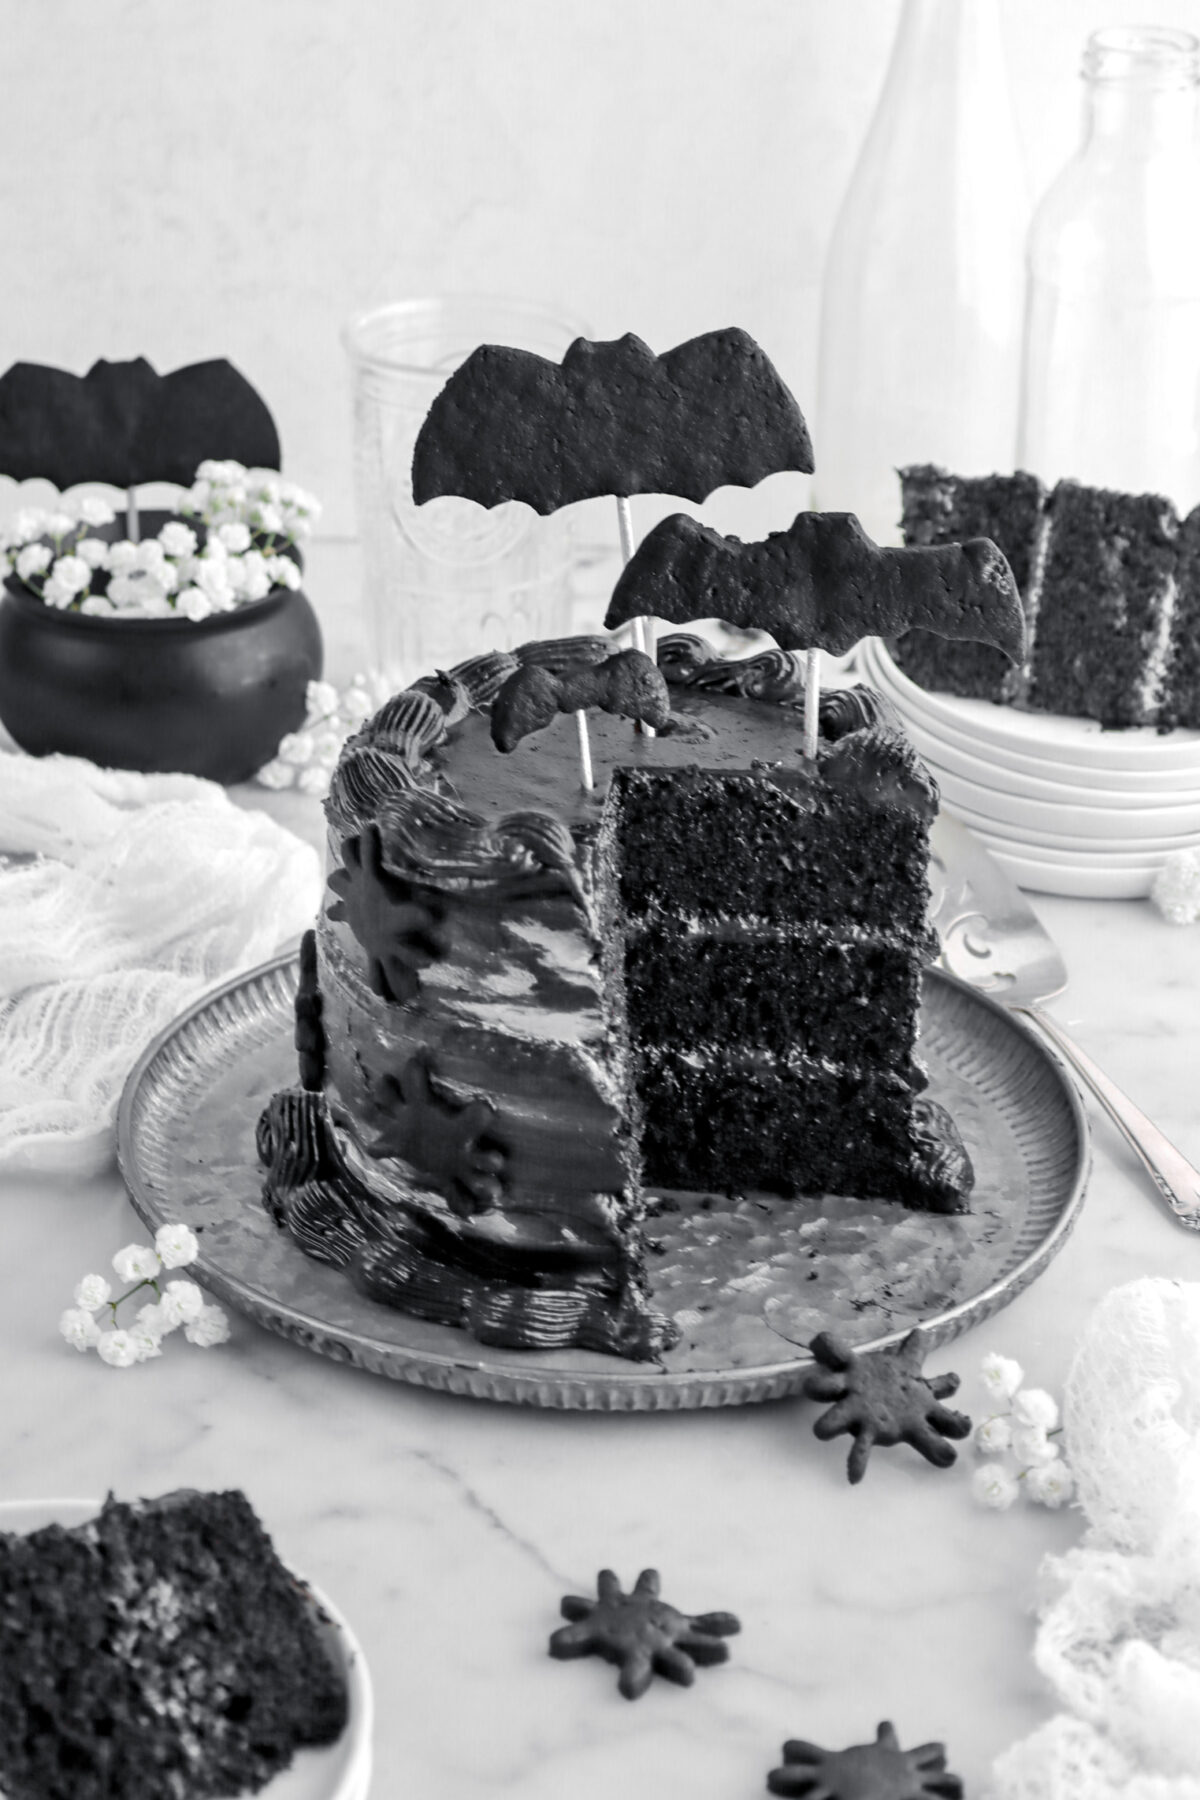 angled image of slices black velvet cake on metal plate with black bats on top and spiders on the side with two slices of cake around.